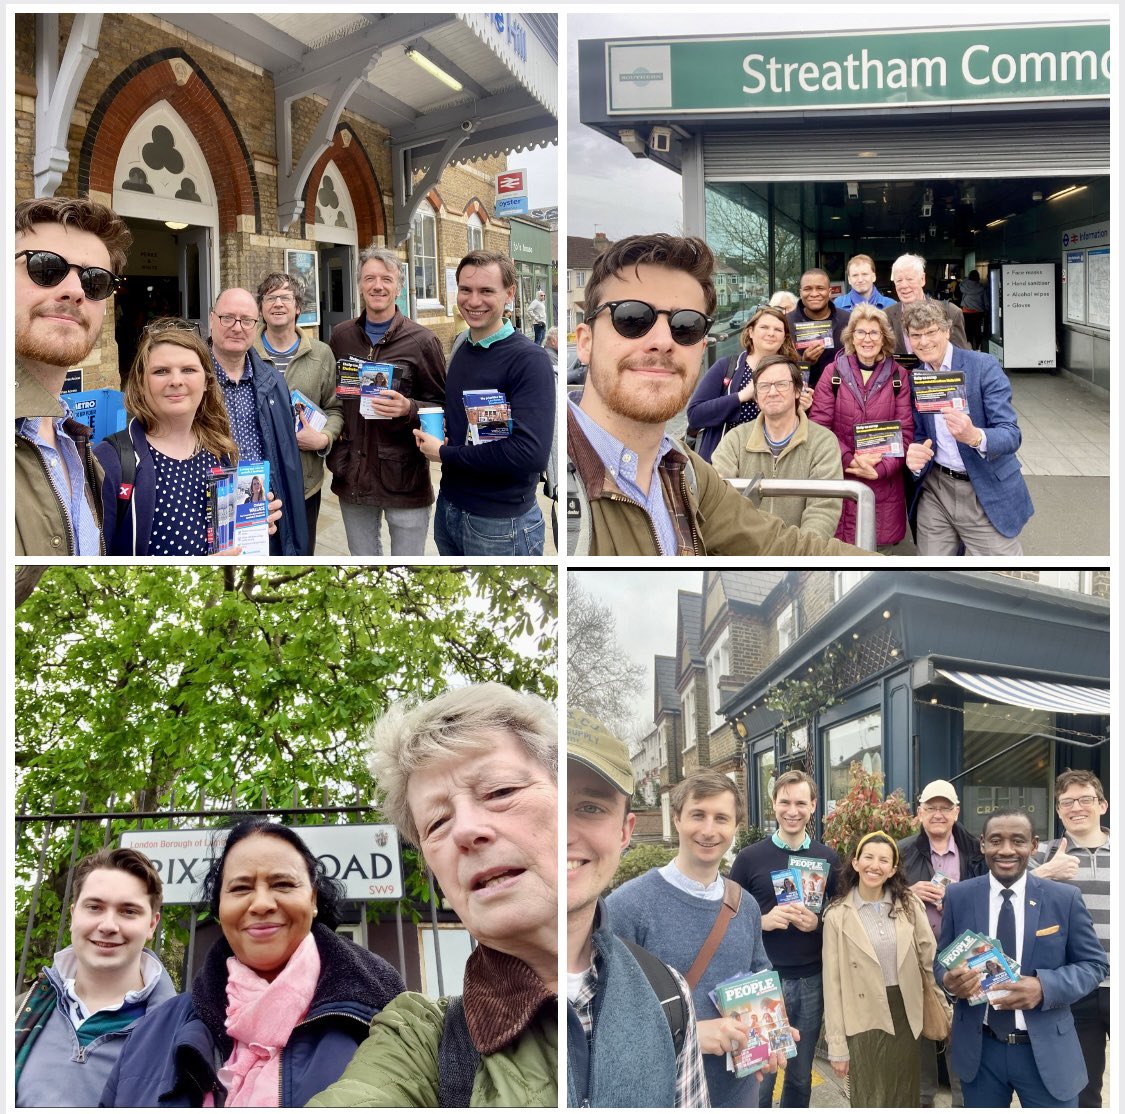 About this Saturday in Lambeth and Southwark… #Campaigning #Conservatives